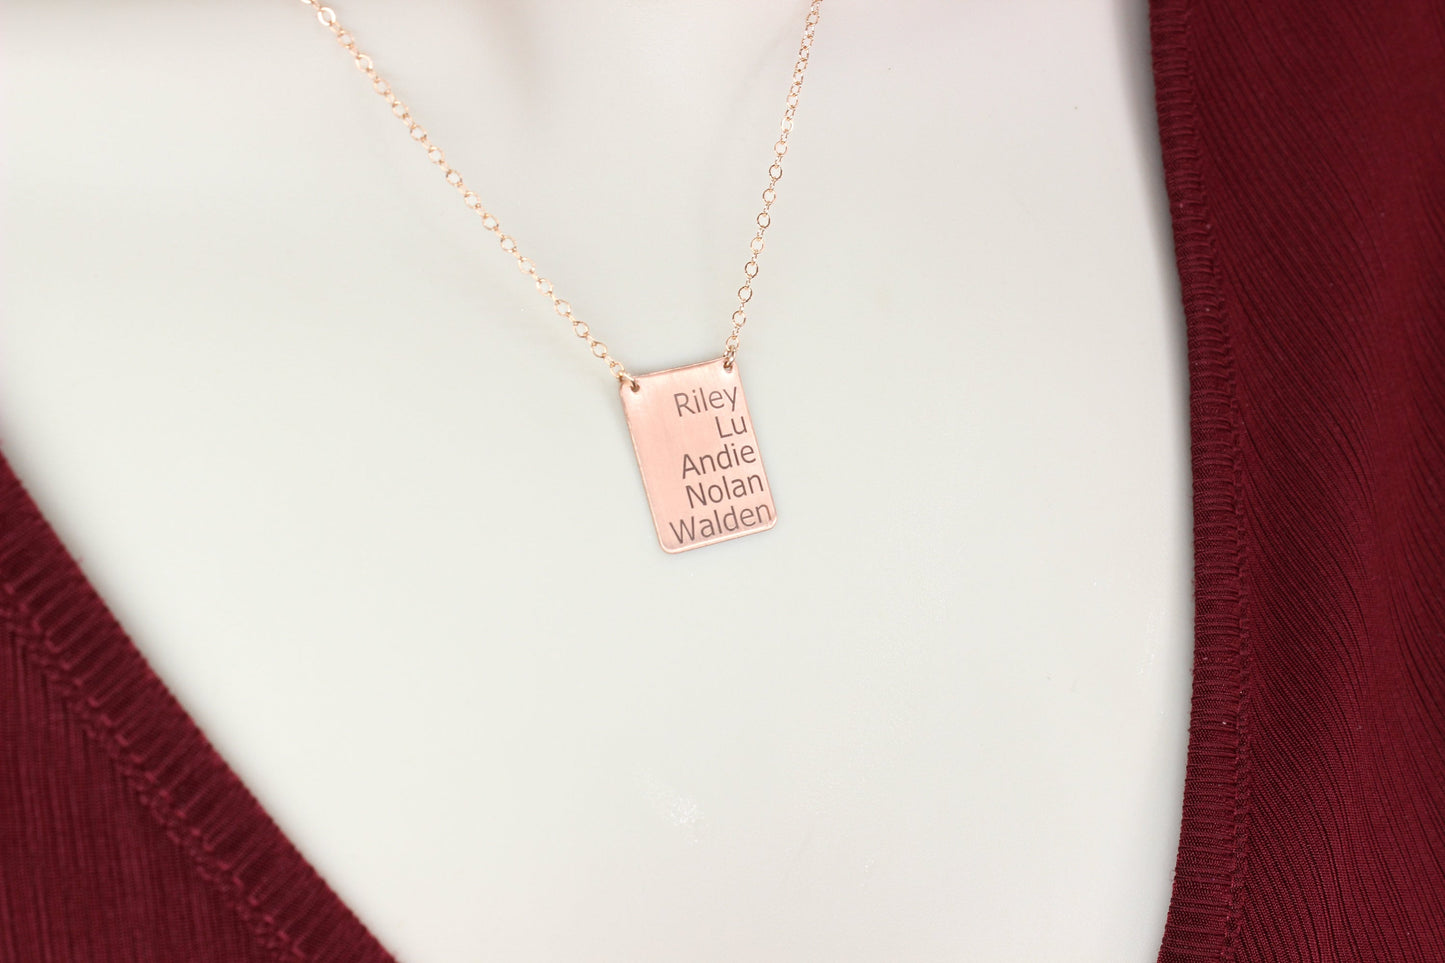 Best Friend Necklace Personalized Gift for Women // Bible Verse Mama Necklace Gift for Mom Handmade Jewelry Unique Jewelry Gift for Her